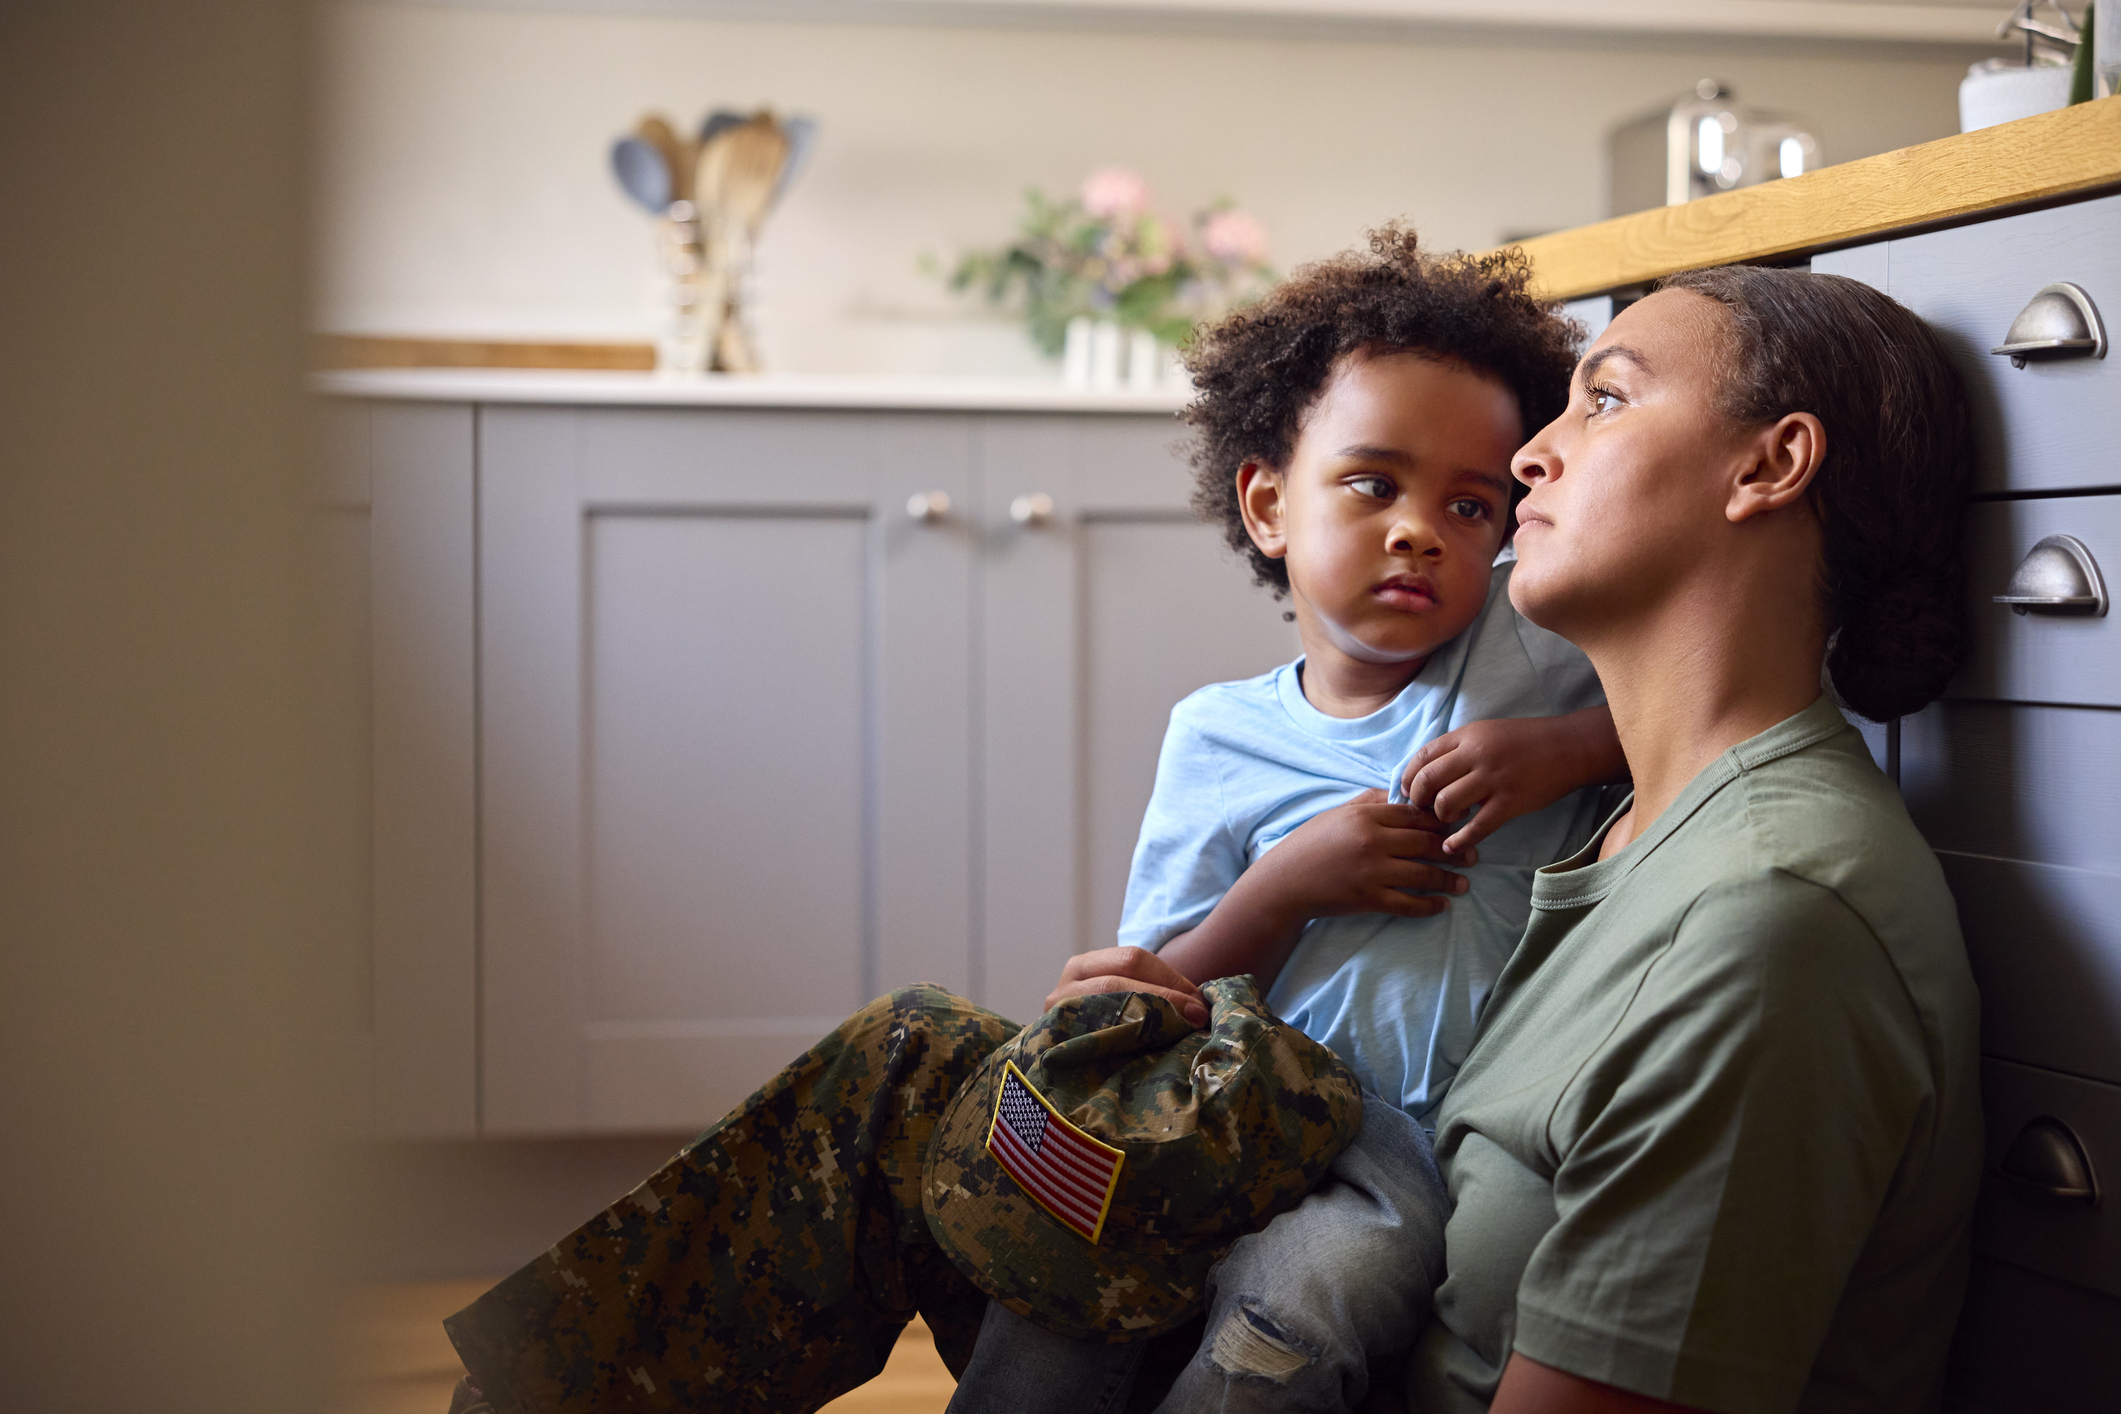 A young light-skinned Black woman wearing a military uniform with her brown hair in a tight bun sits on the floor in her kitchen, staring into space while her son, a toddler with curly black hair and a concerned expression, tries to get her attention